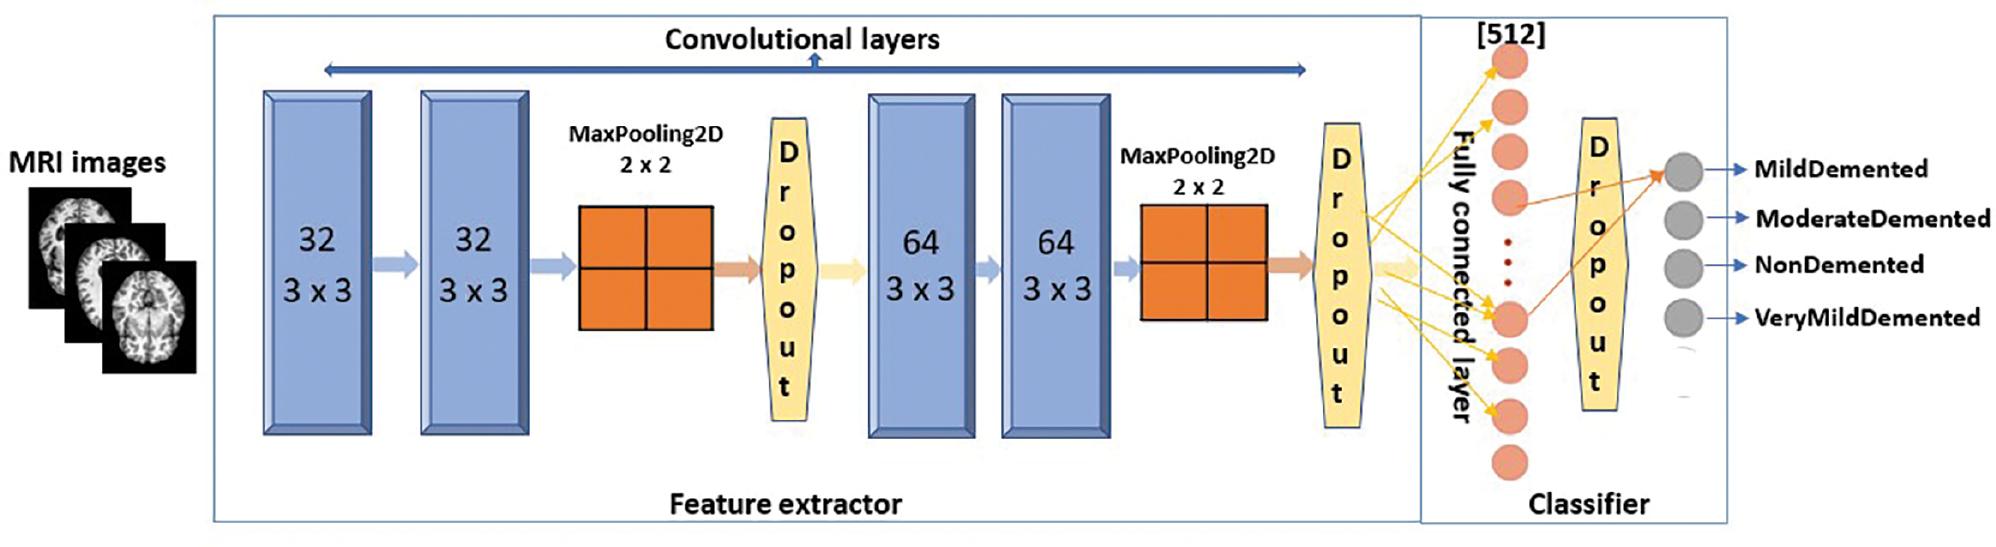 The proposed convolutional neural network (CNN) model